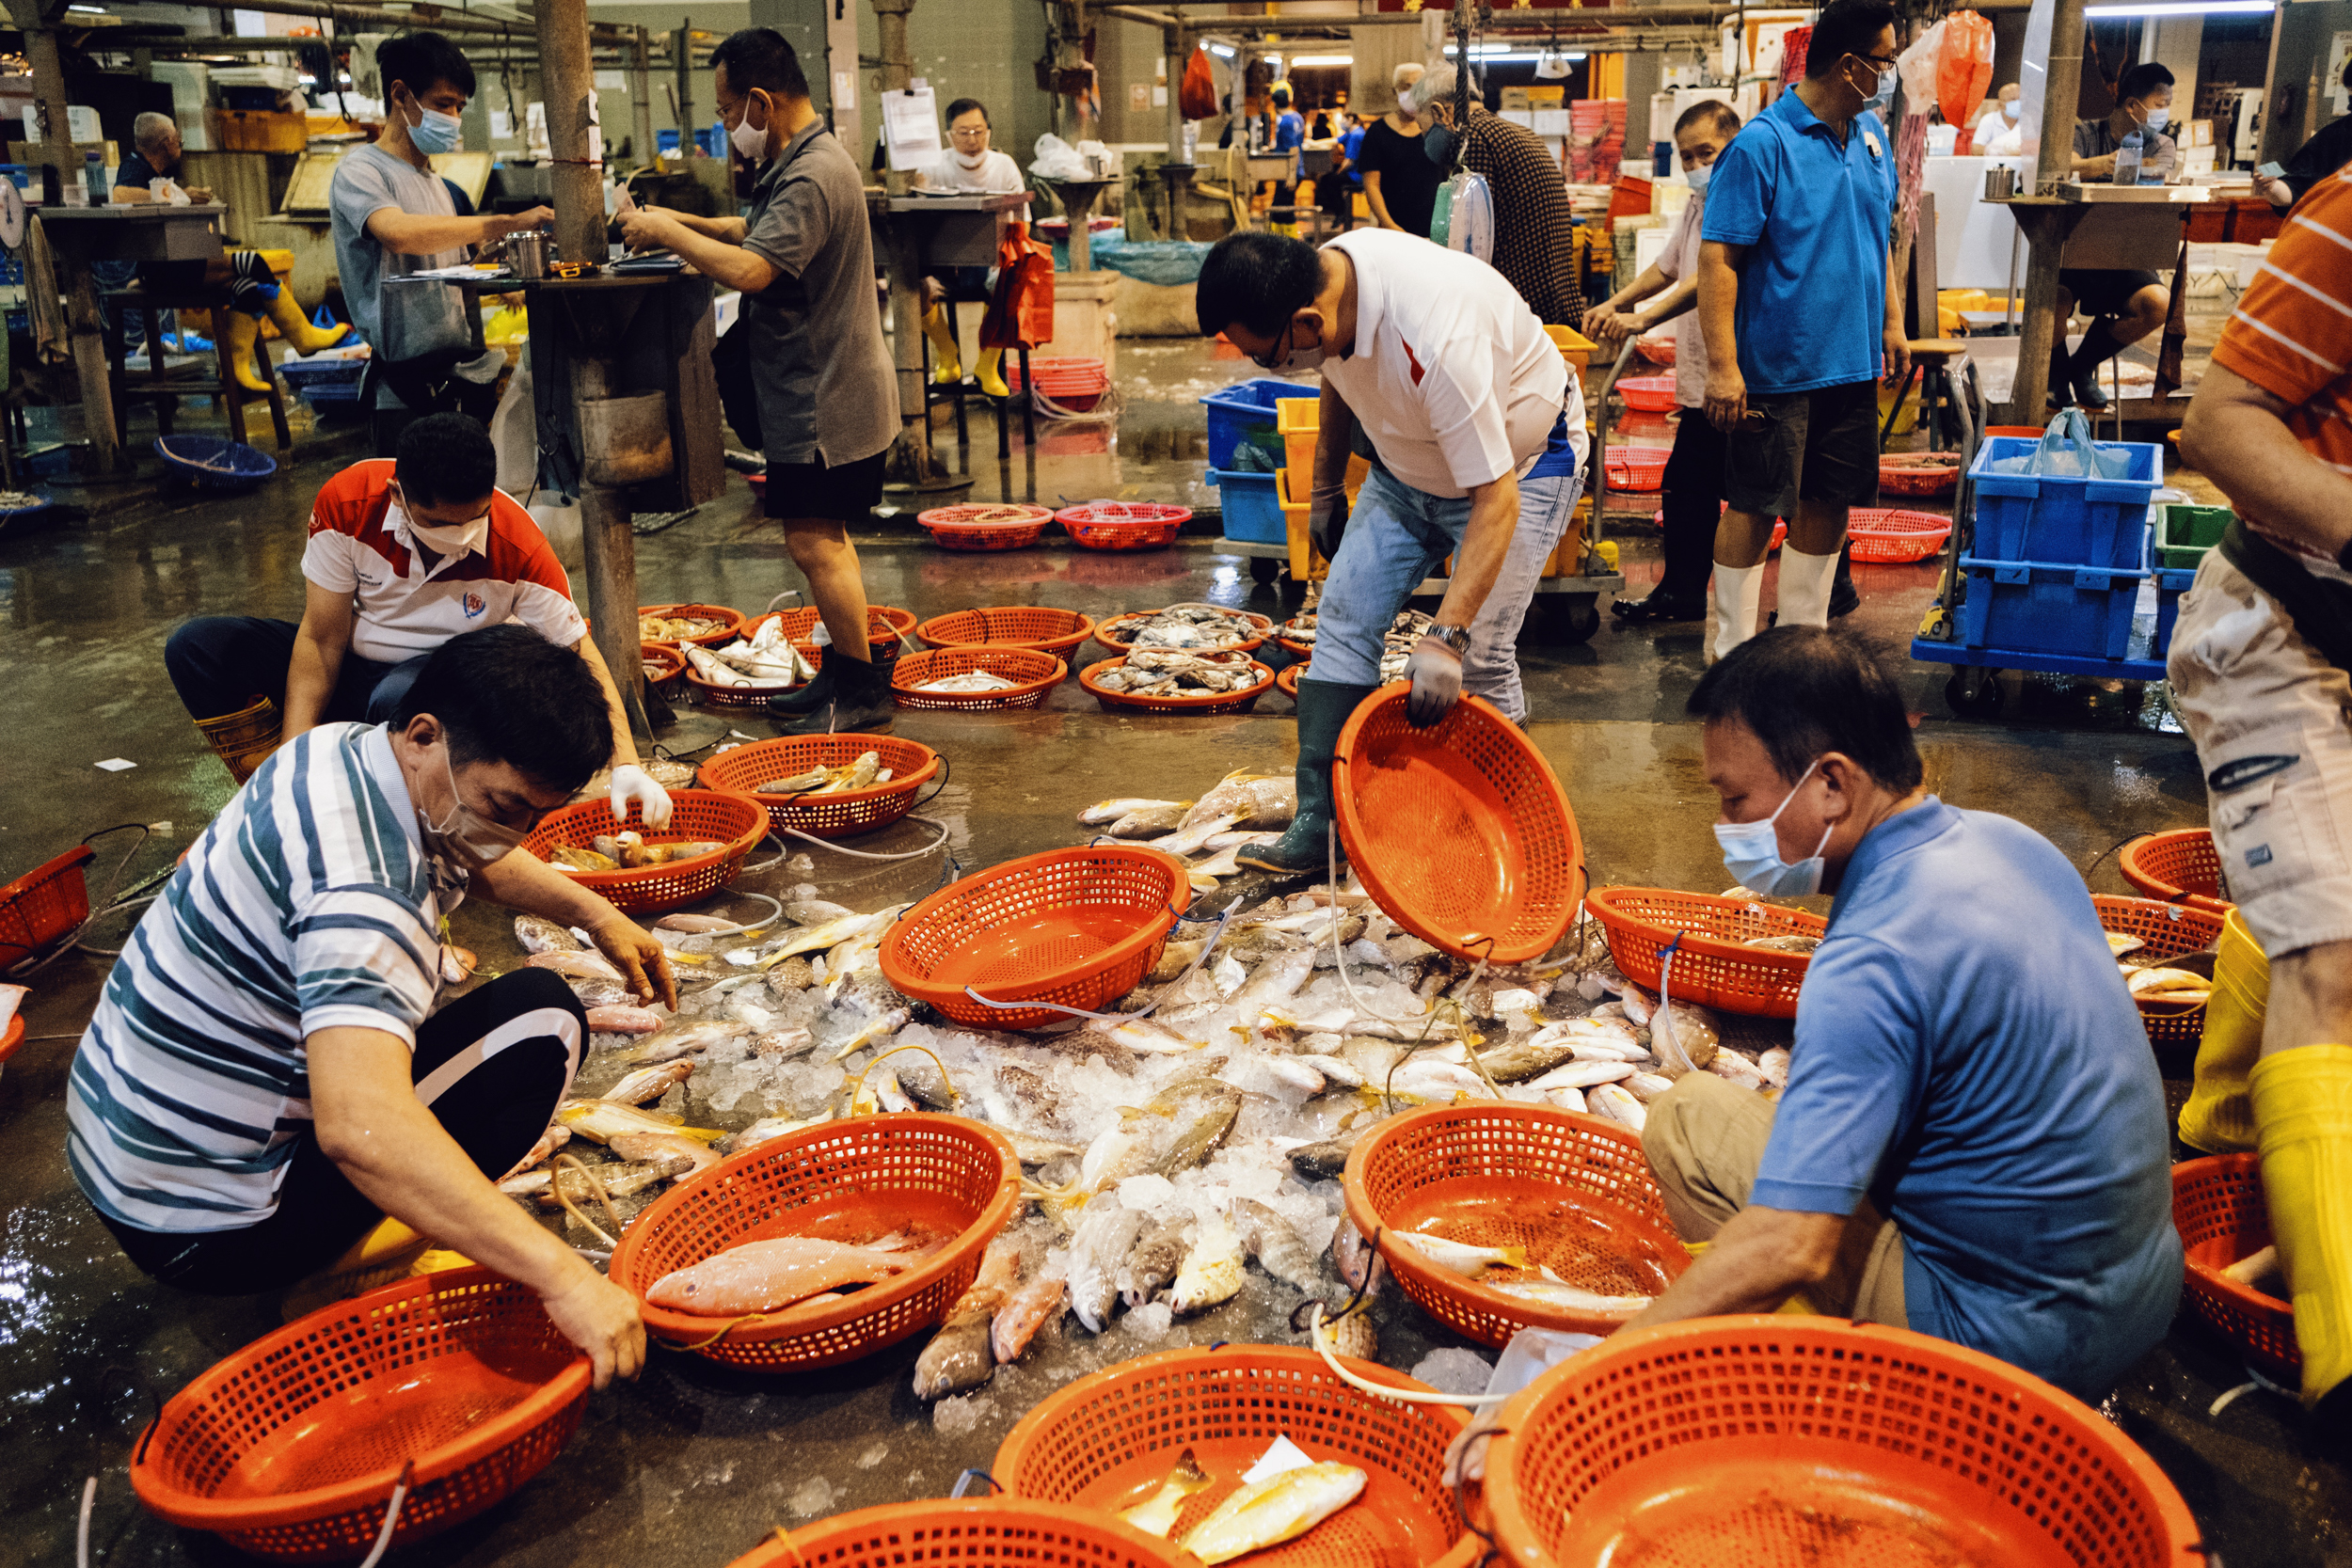 Workers sort the fishes into baskets.